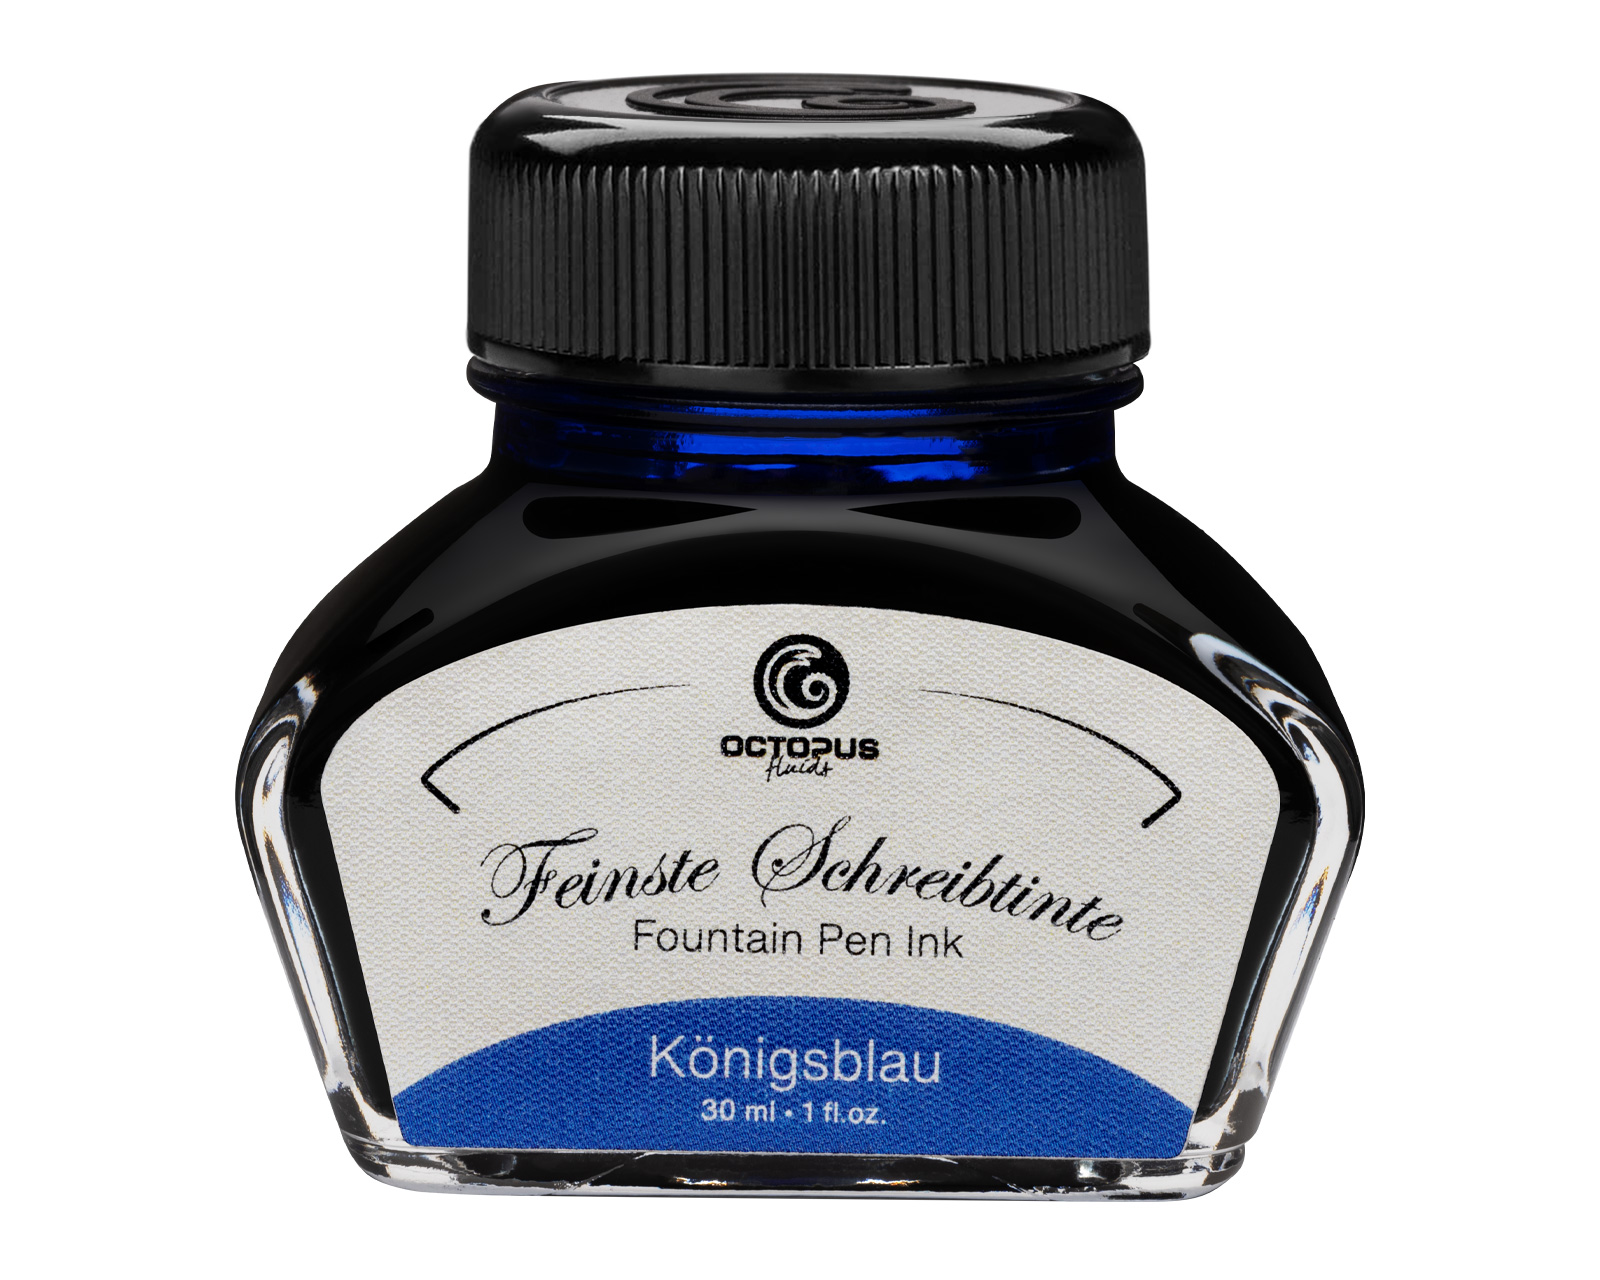 Finest premium writing ink in glass flacon for fountain pens and nibs, fountain pen ink 30ml Royal Blue erasable